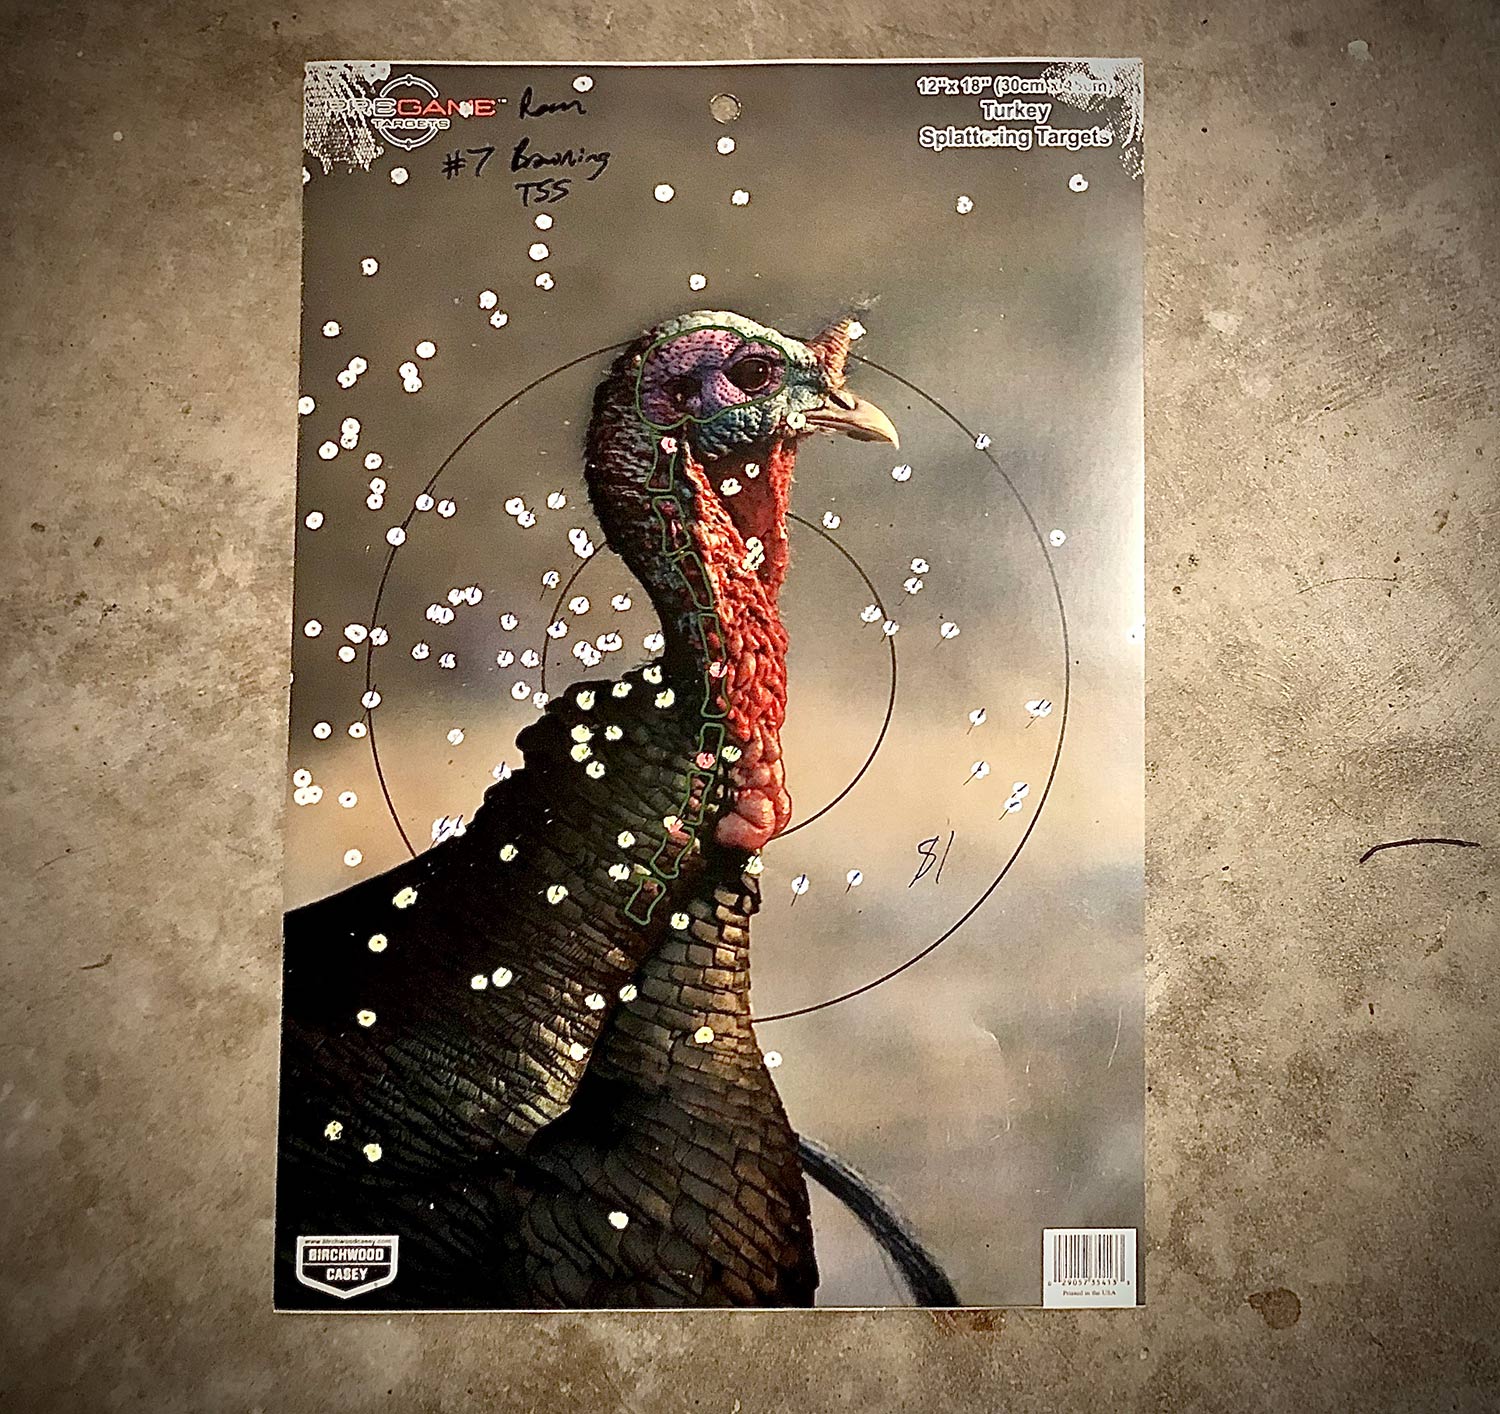 A turkey target riddled with pellet holes.